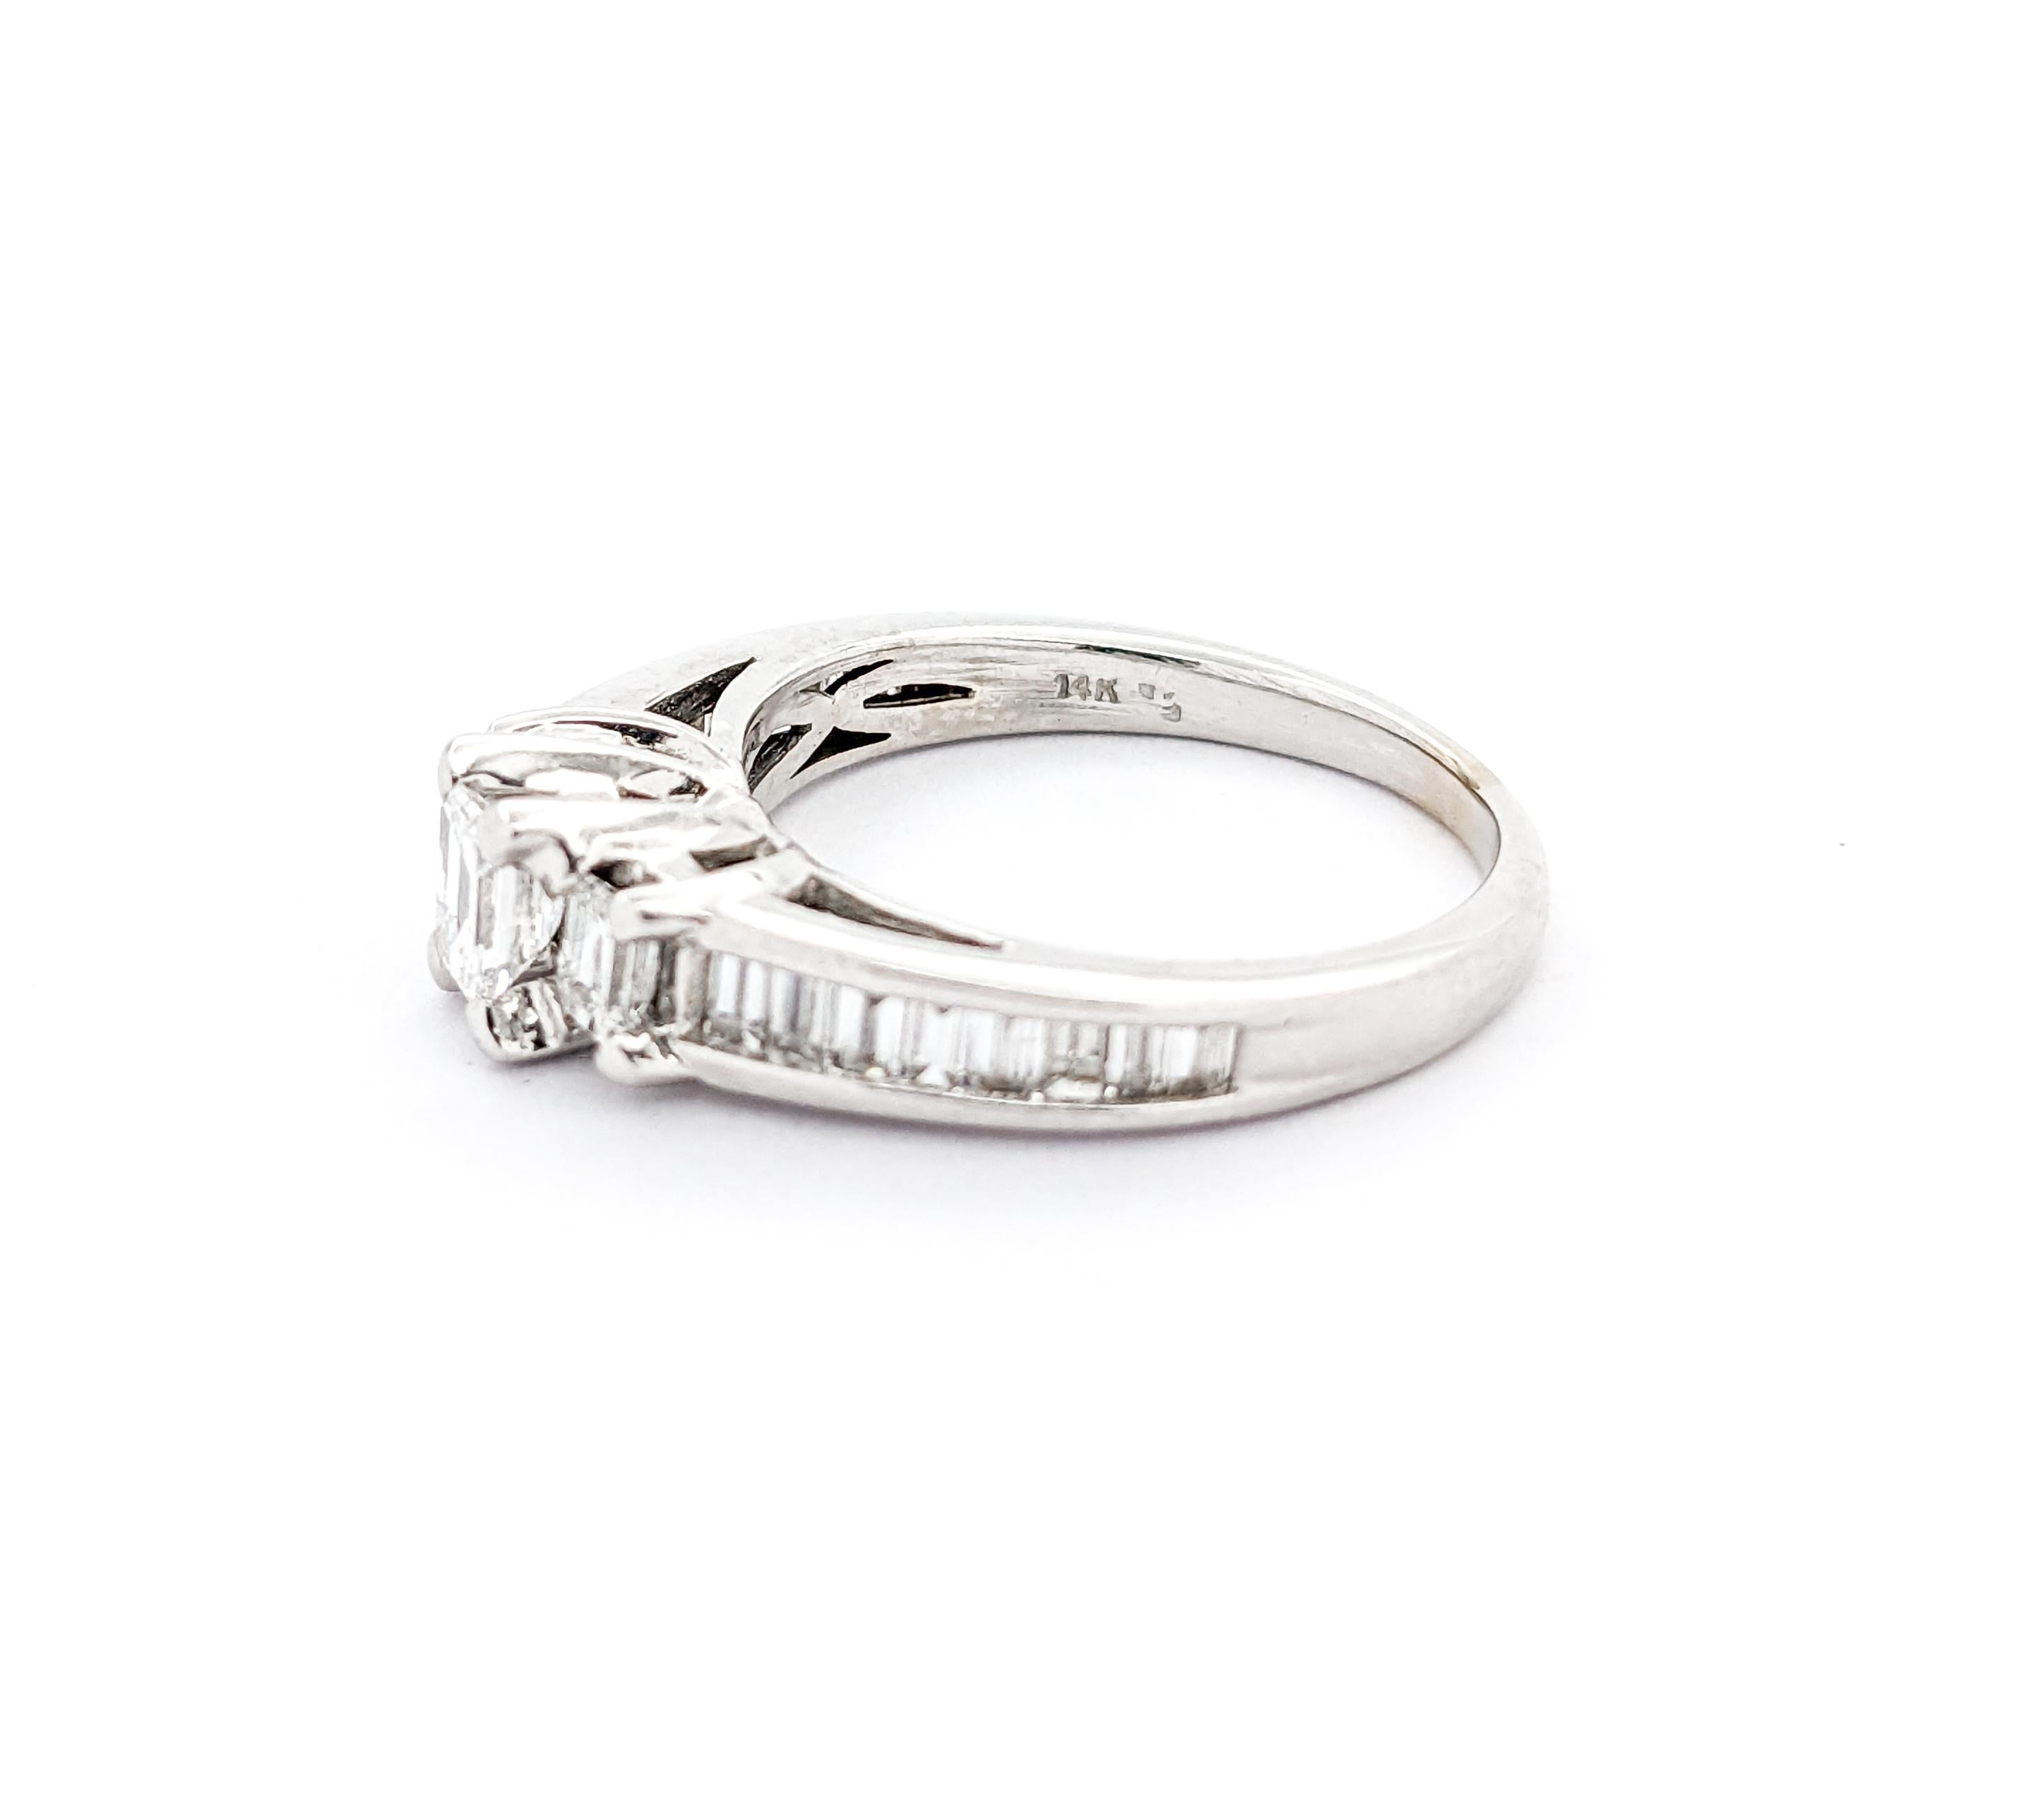 1ctw Diamond Engagement Ring In White Gold 1